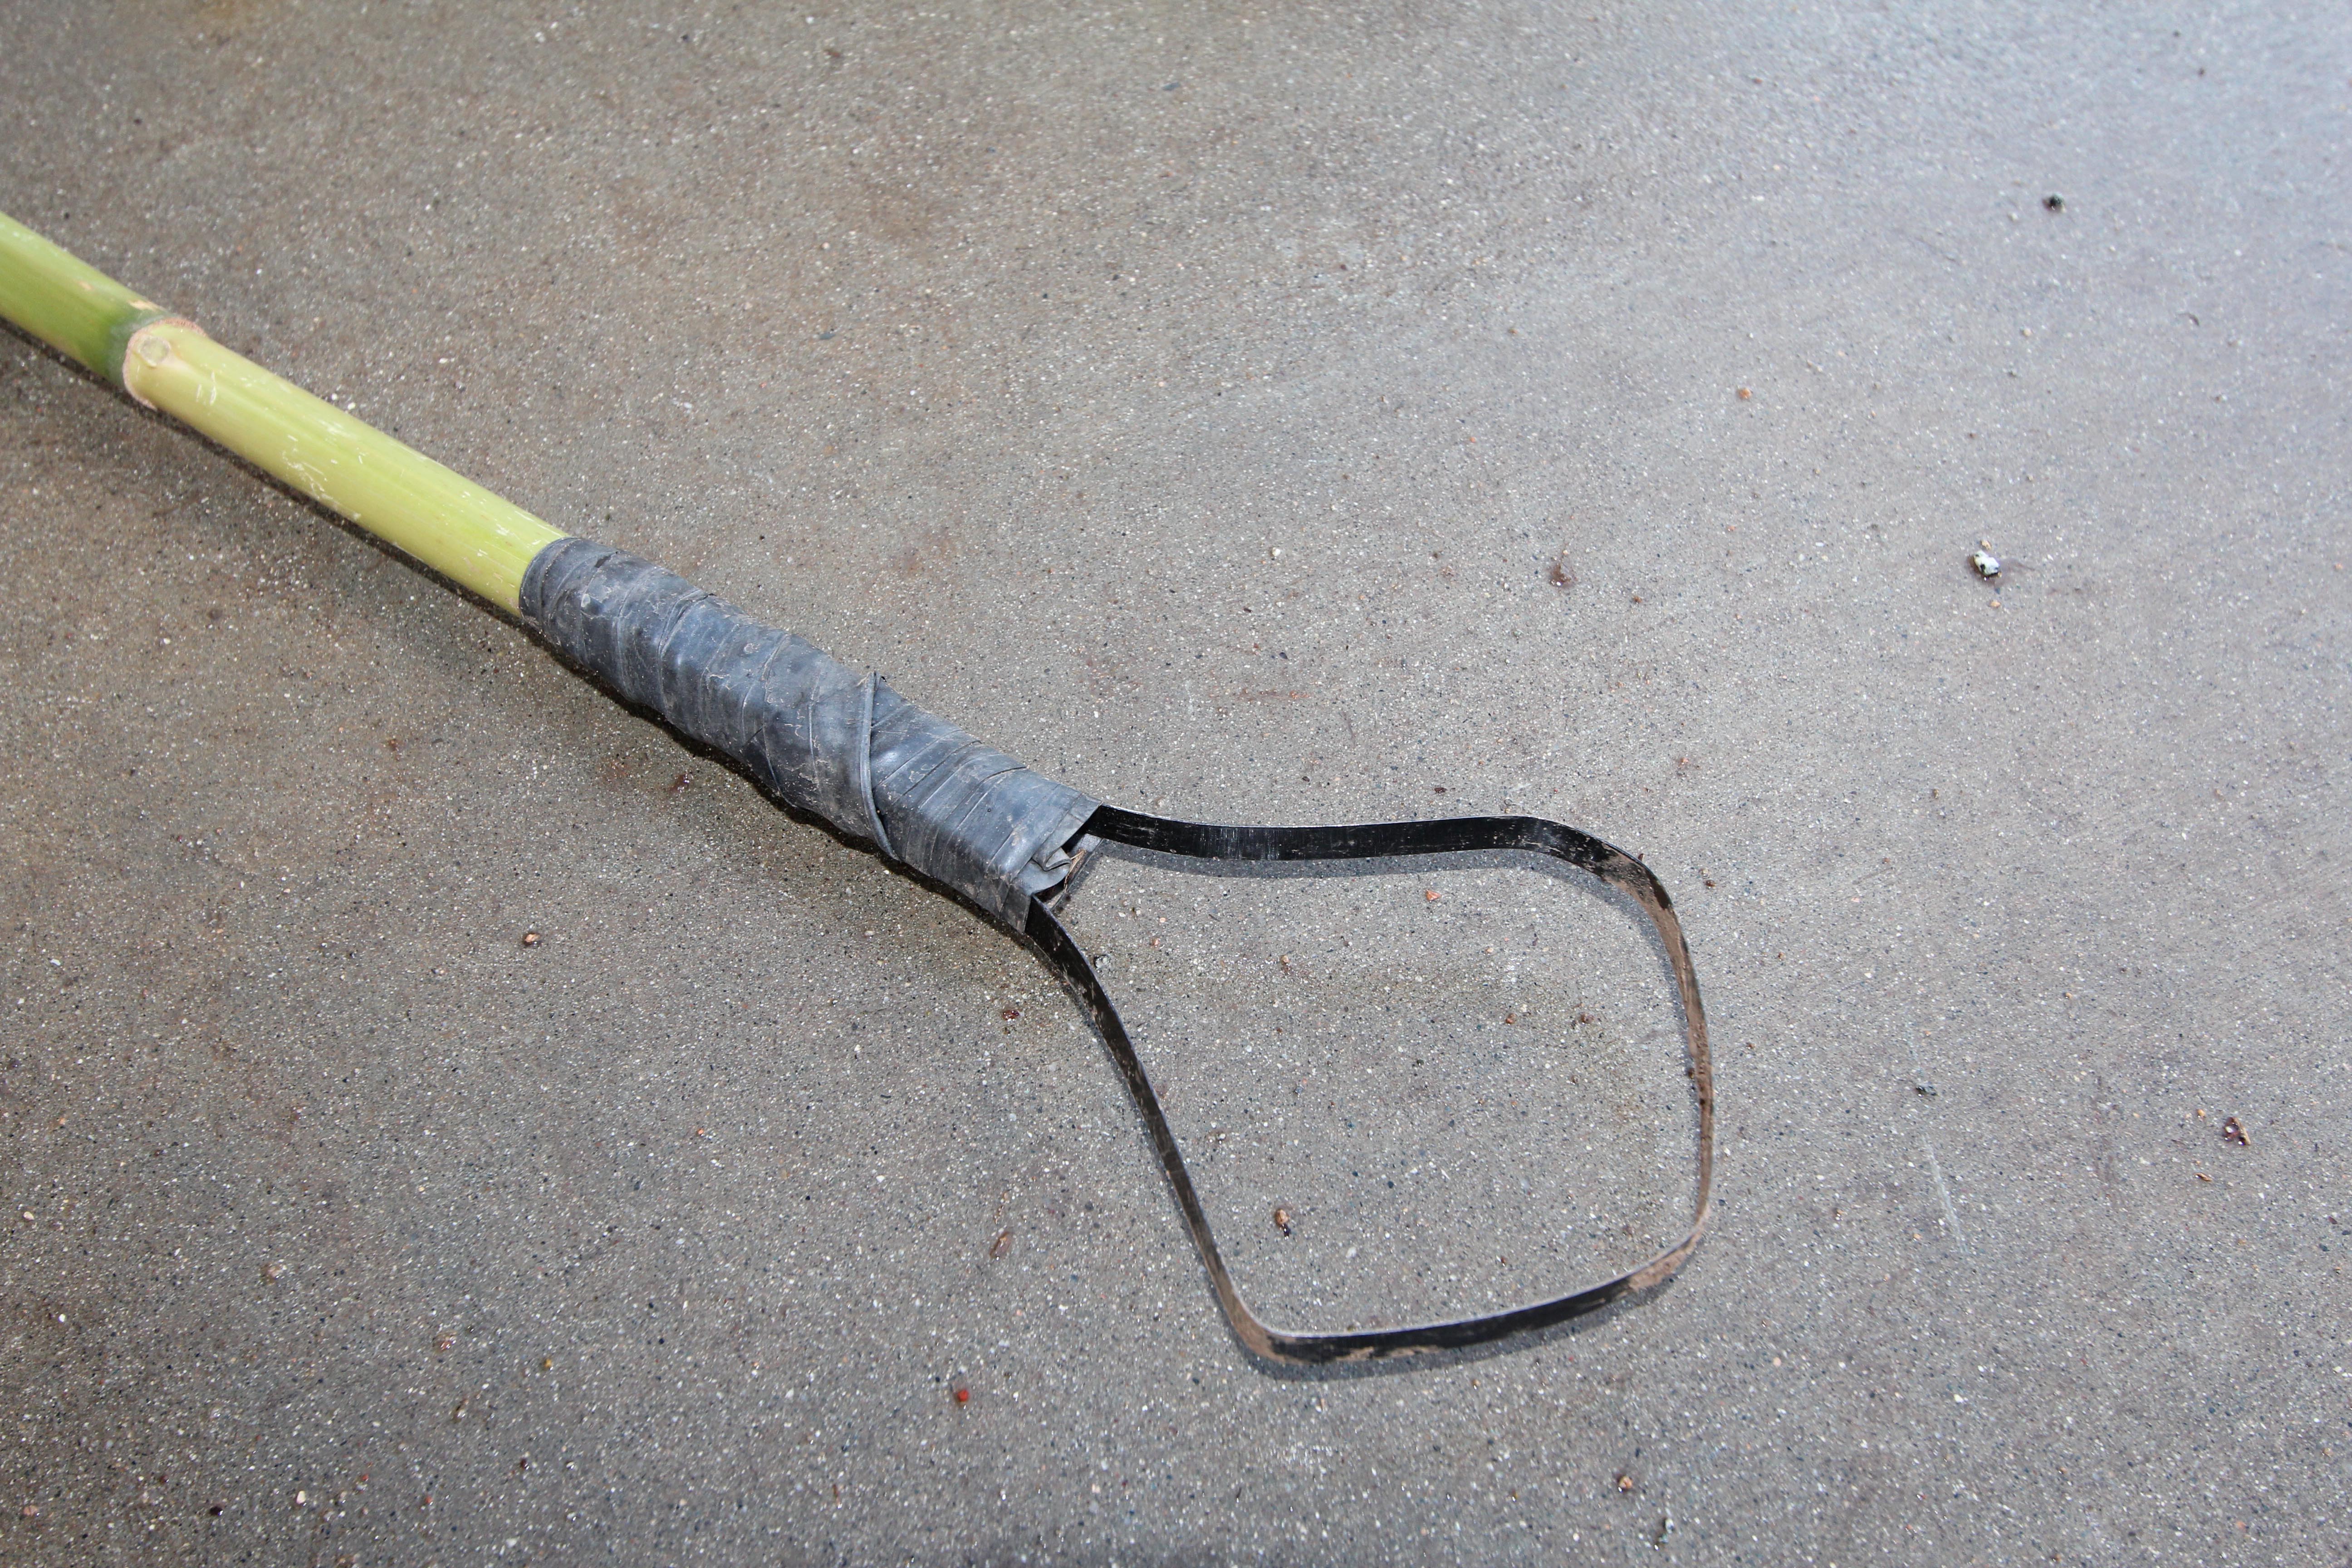 HOE with INTERCHANGEABLE, PLASTIC MULCH FRIENDLY, ADJUSTABLE, SHARP & FLEXIBLE blades, "RECYCLE STRAP HOE"